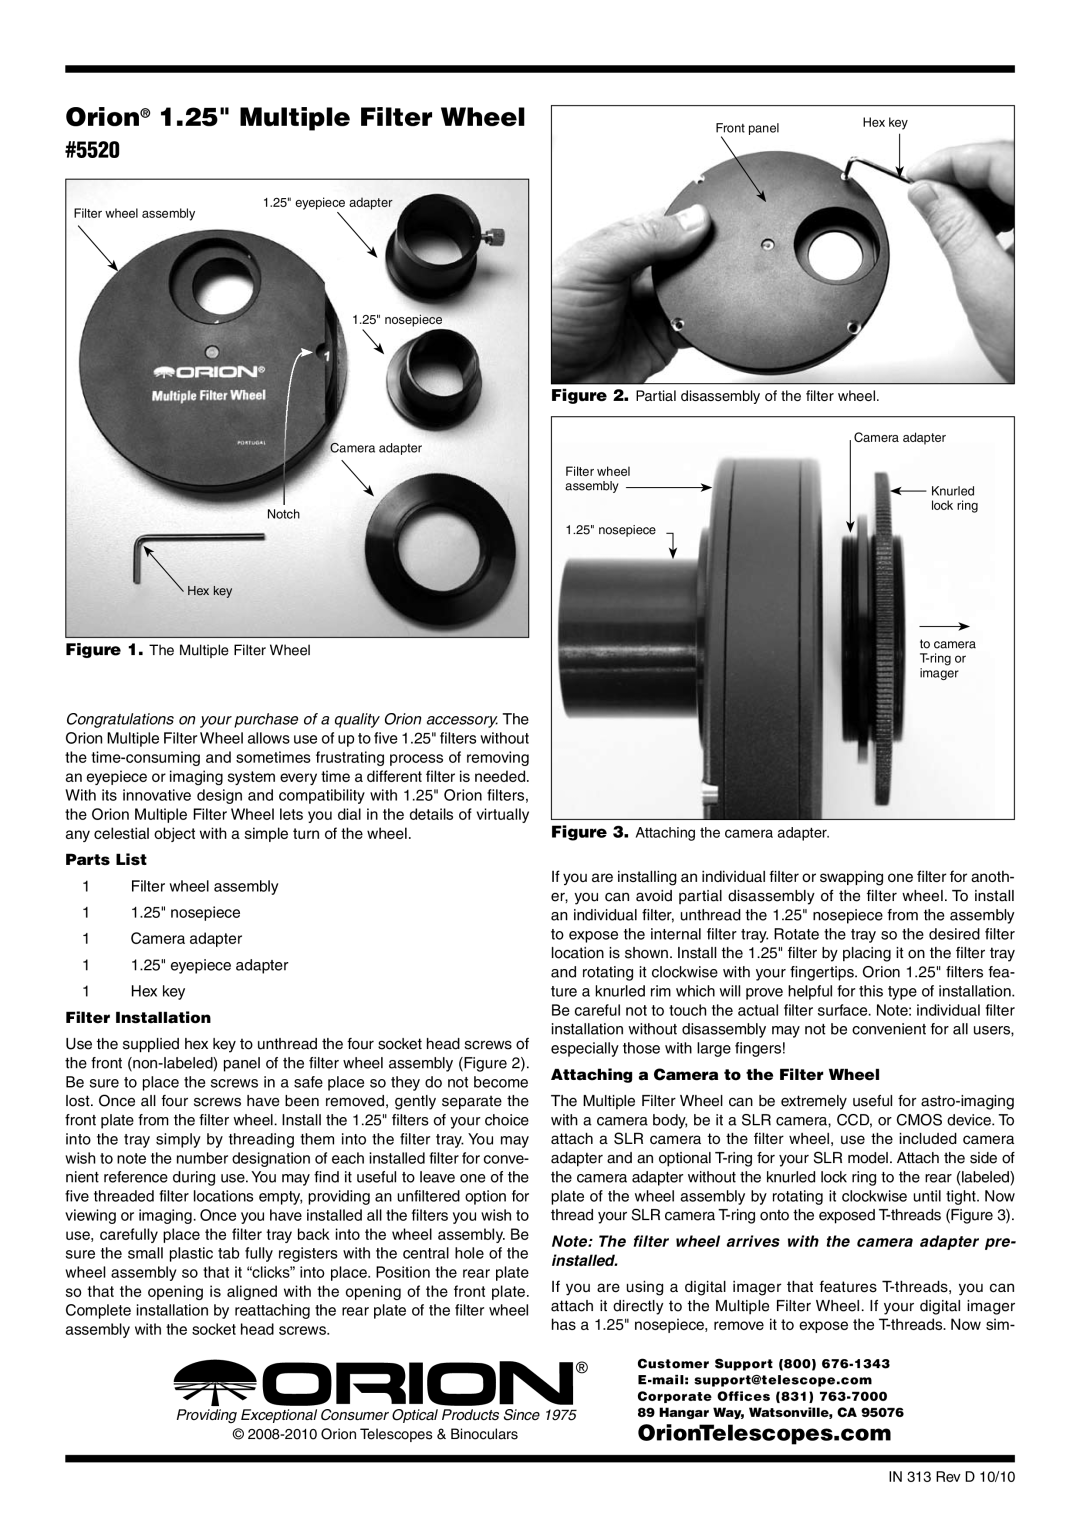 Orion manual Parts List, Filter Installation, Attaching a Camera to the Filter Wheel, #5520, OrionTelescopes.com 